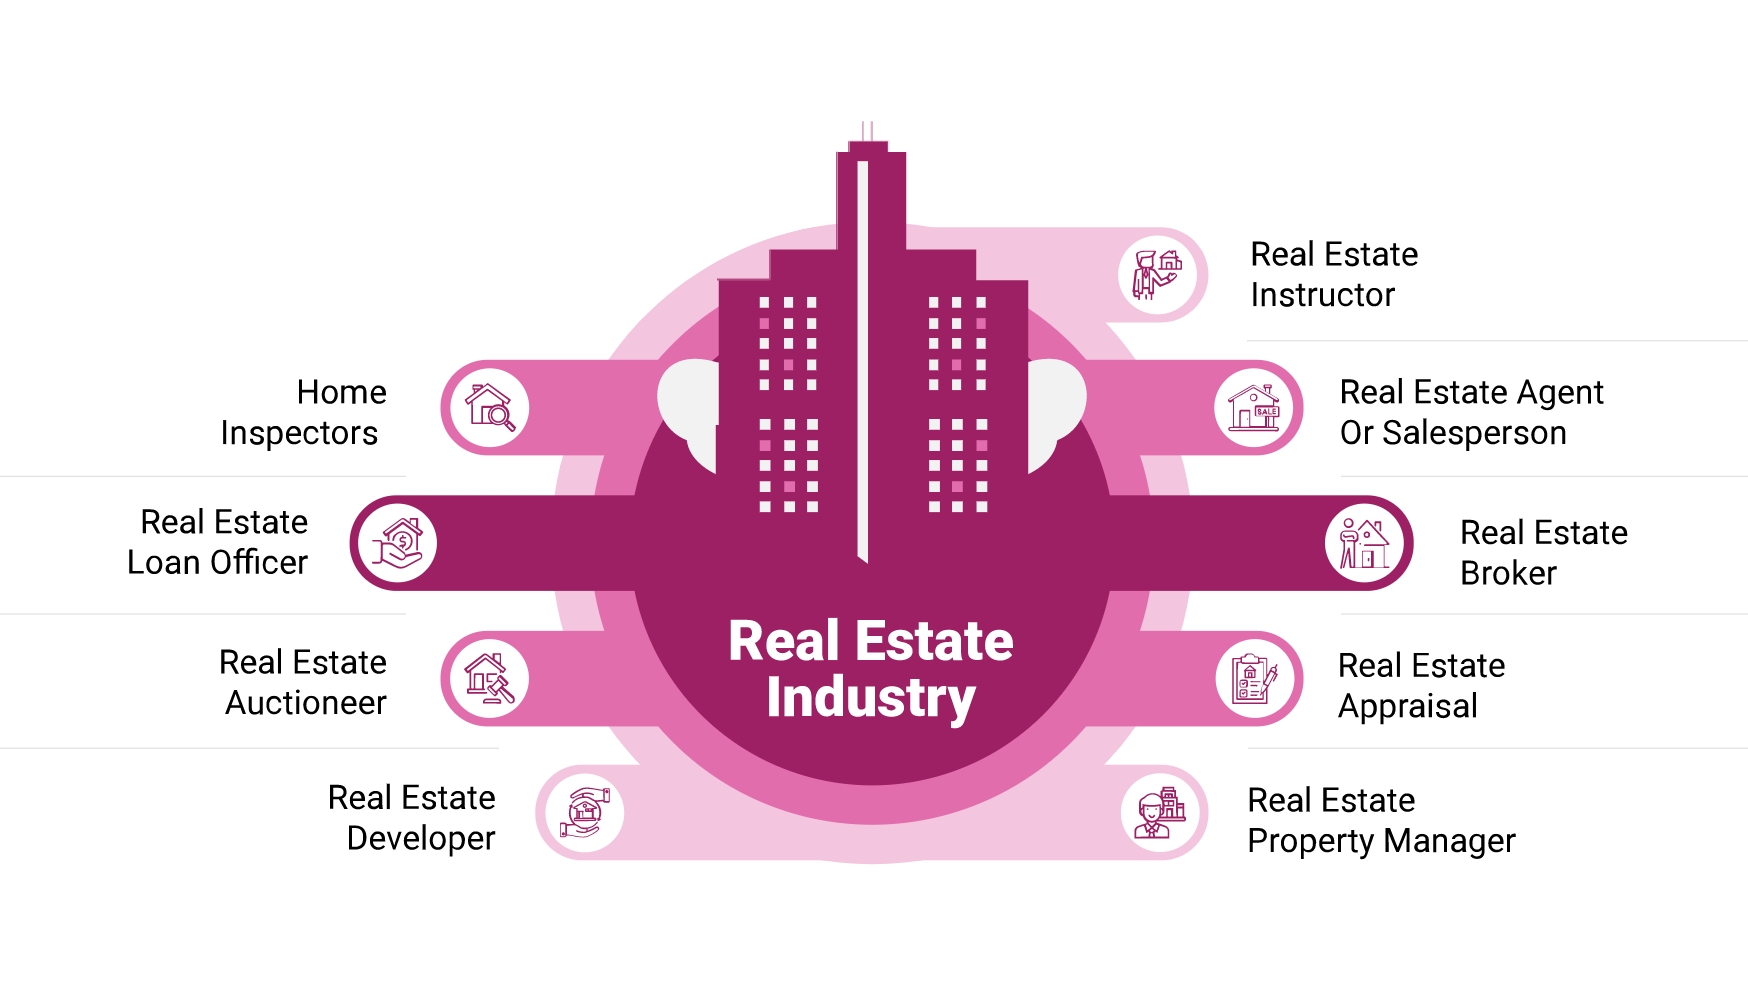 Real Estate Industry